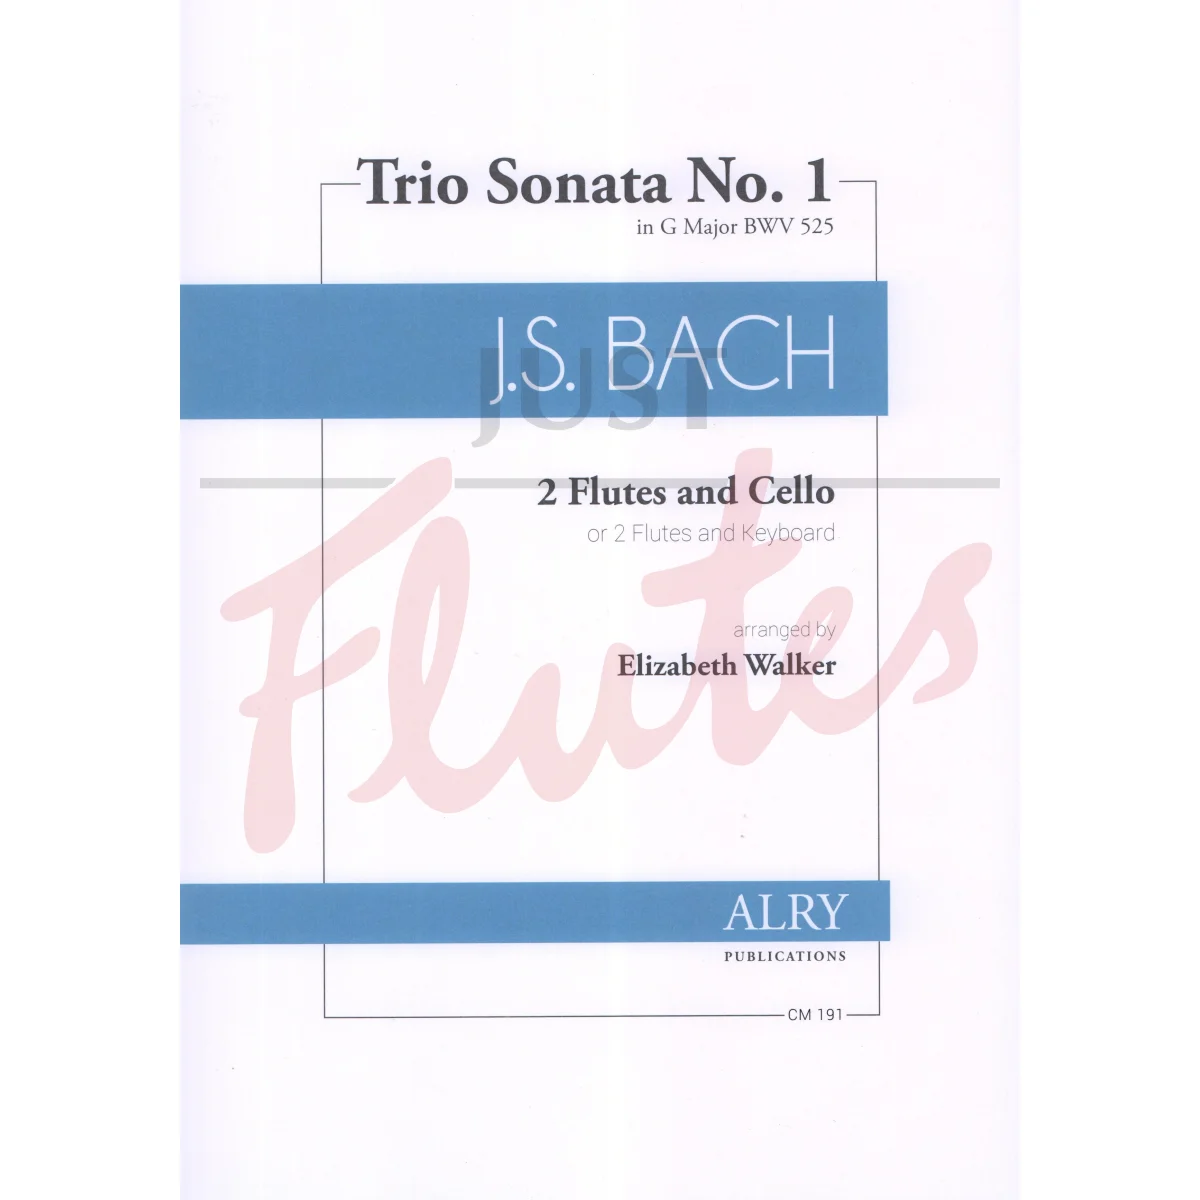 Trio Sonata No. 1 in G major for Two Flutes and Cello/Keyboard